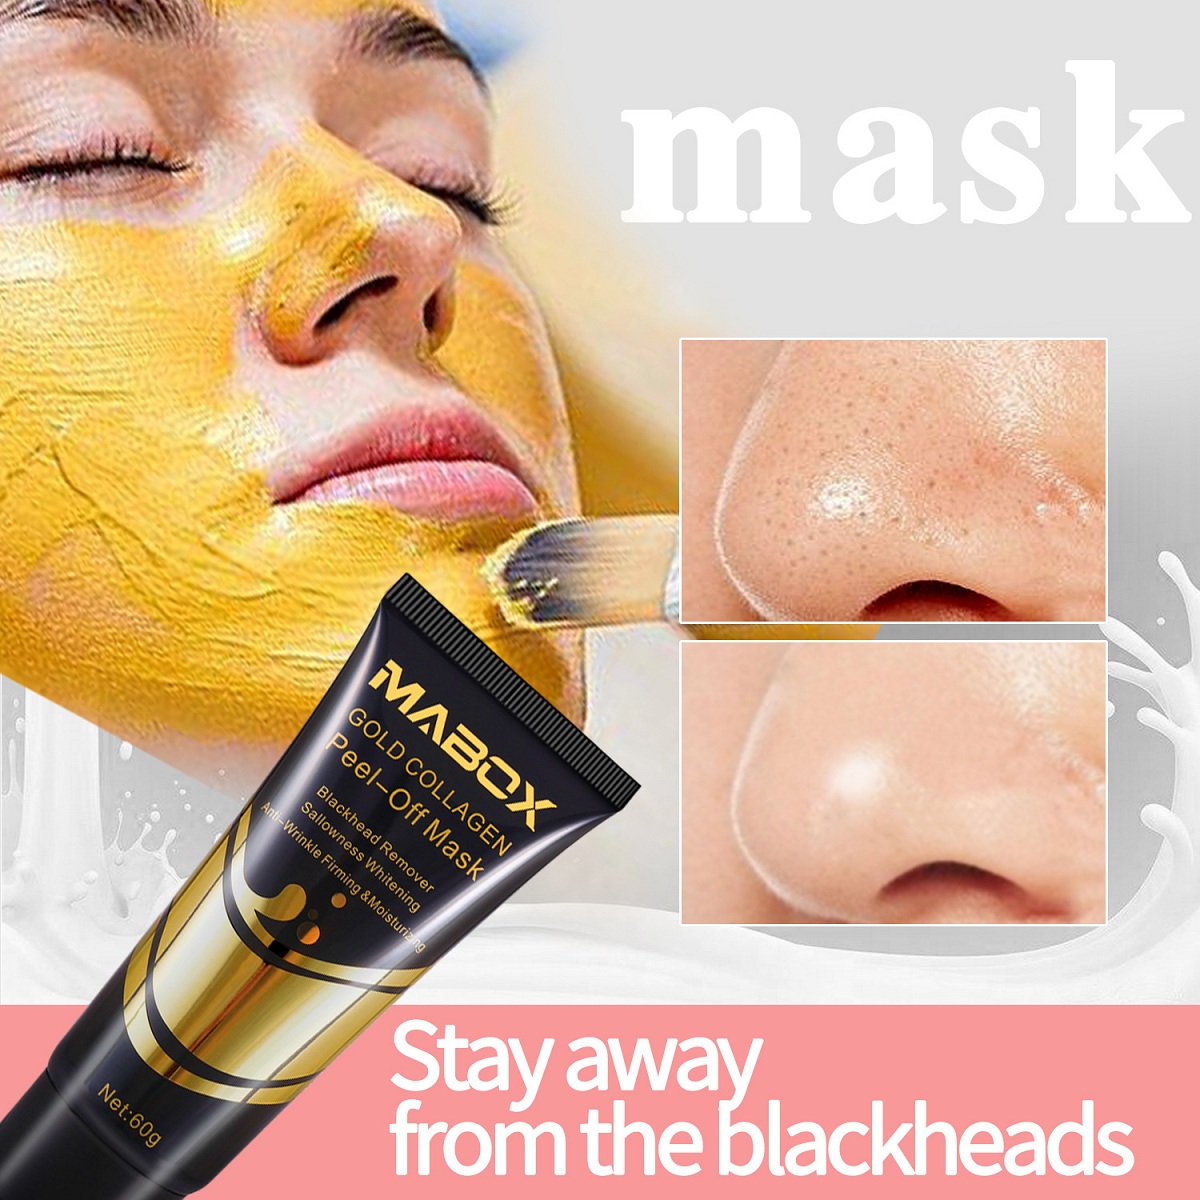 Gold Collagen Peel Off Facial Mask Blackhead Removal